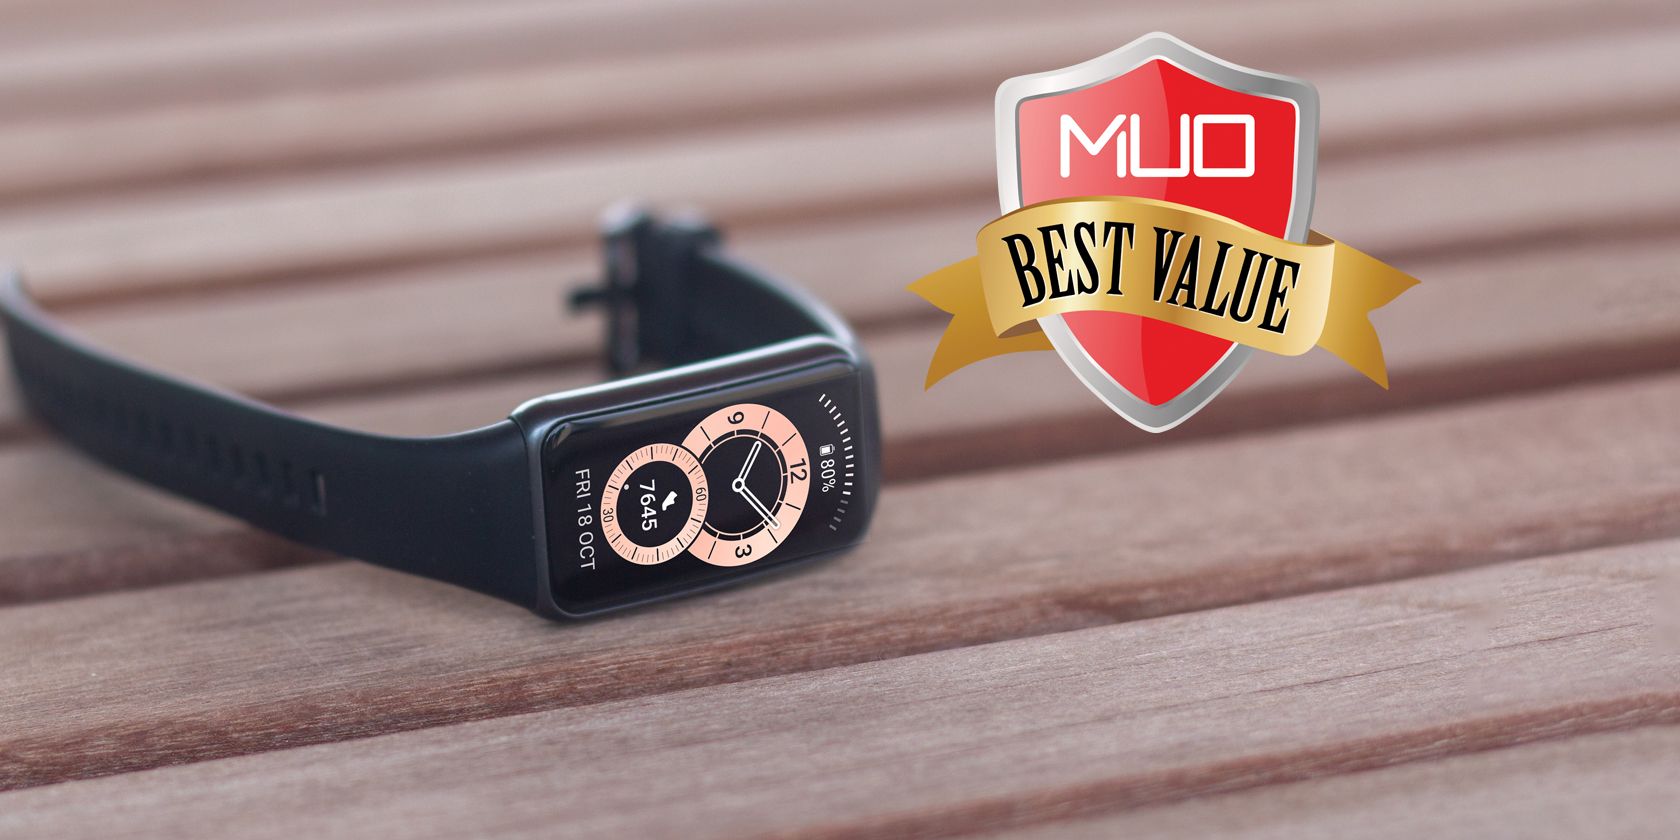 Huawei Band 6 Full Review and Ratings: Comfortable, looks good and gets the  basics right